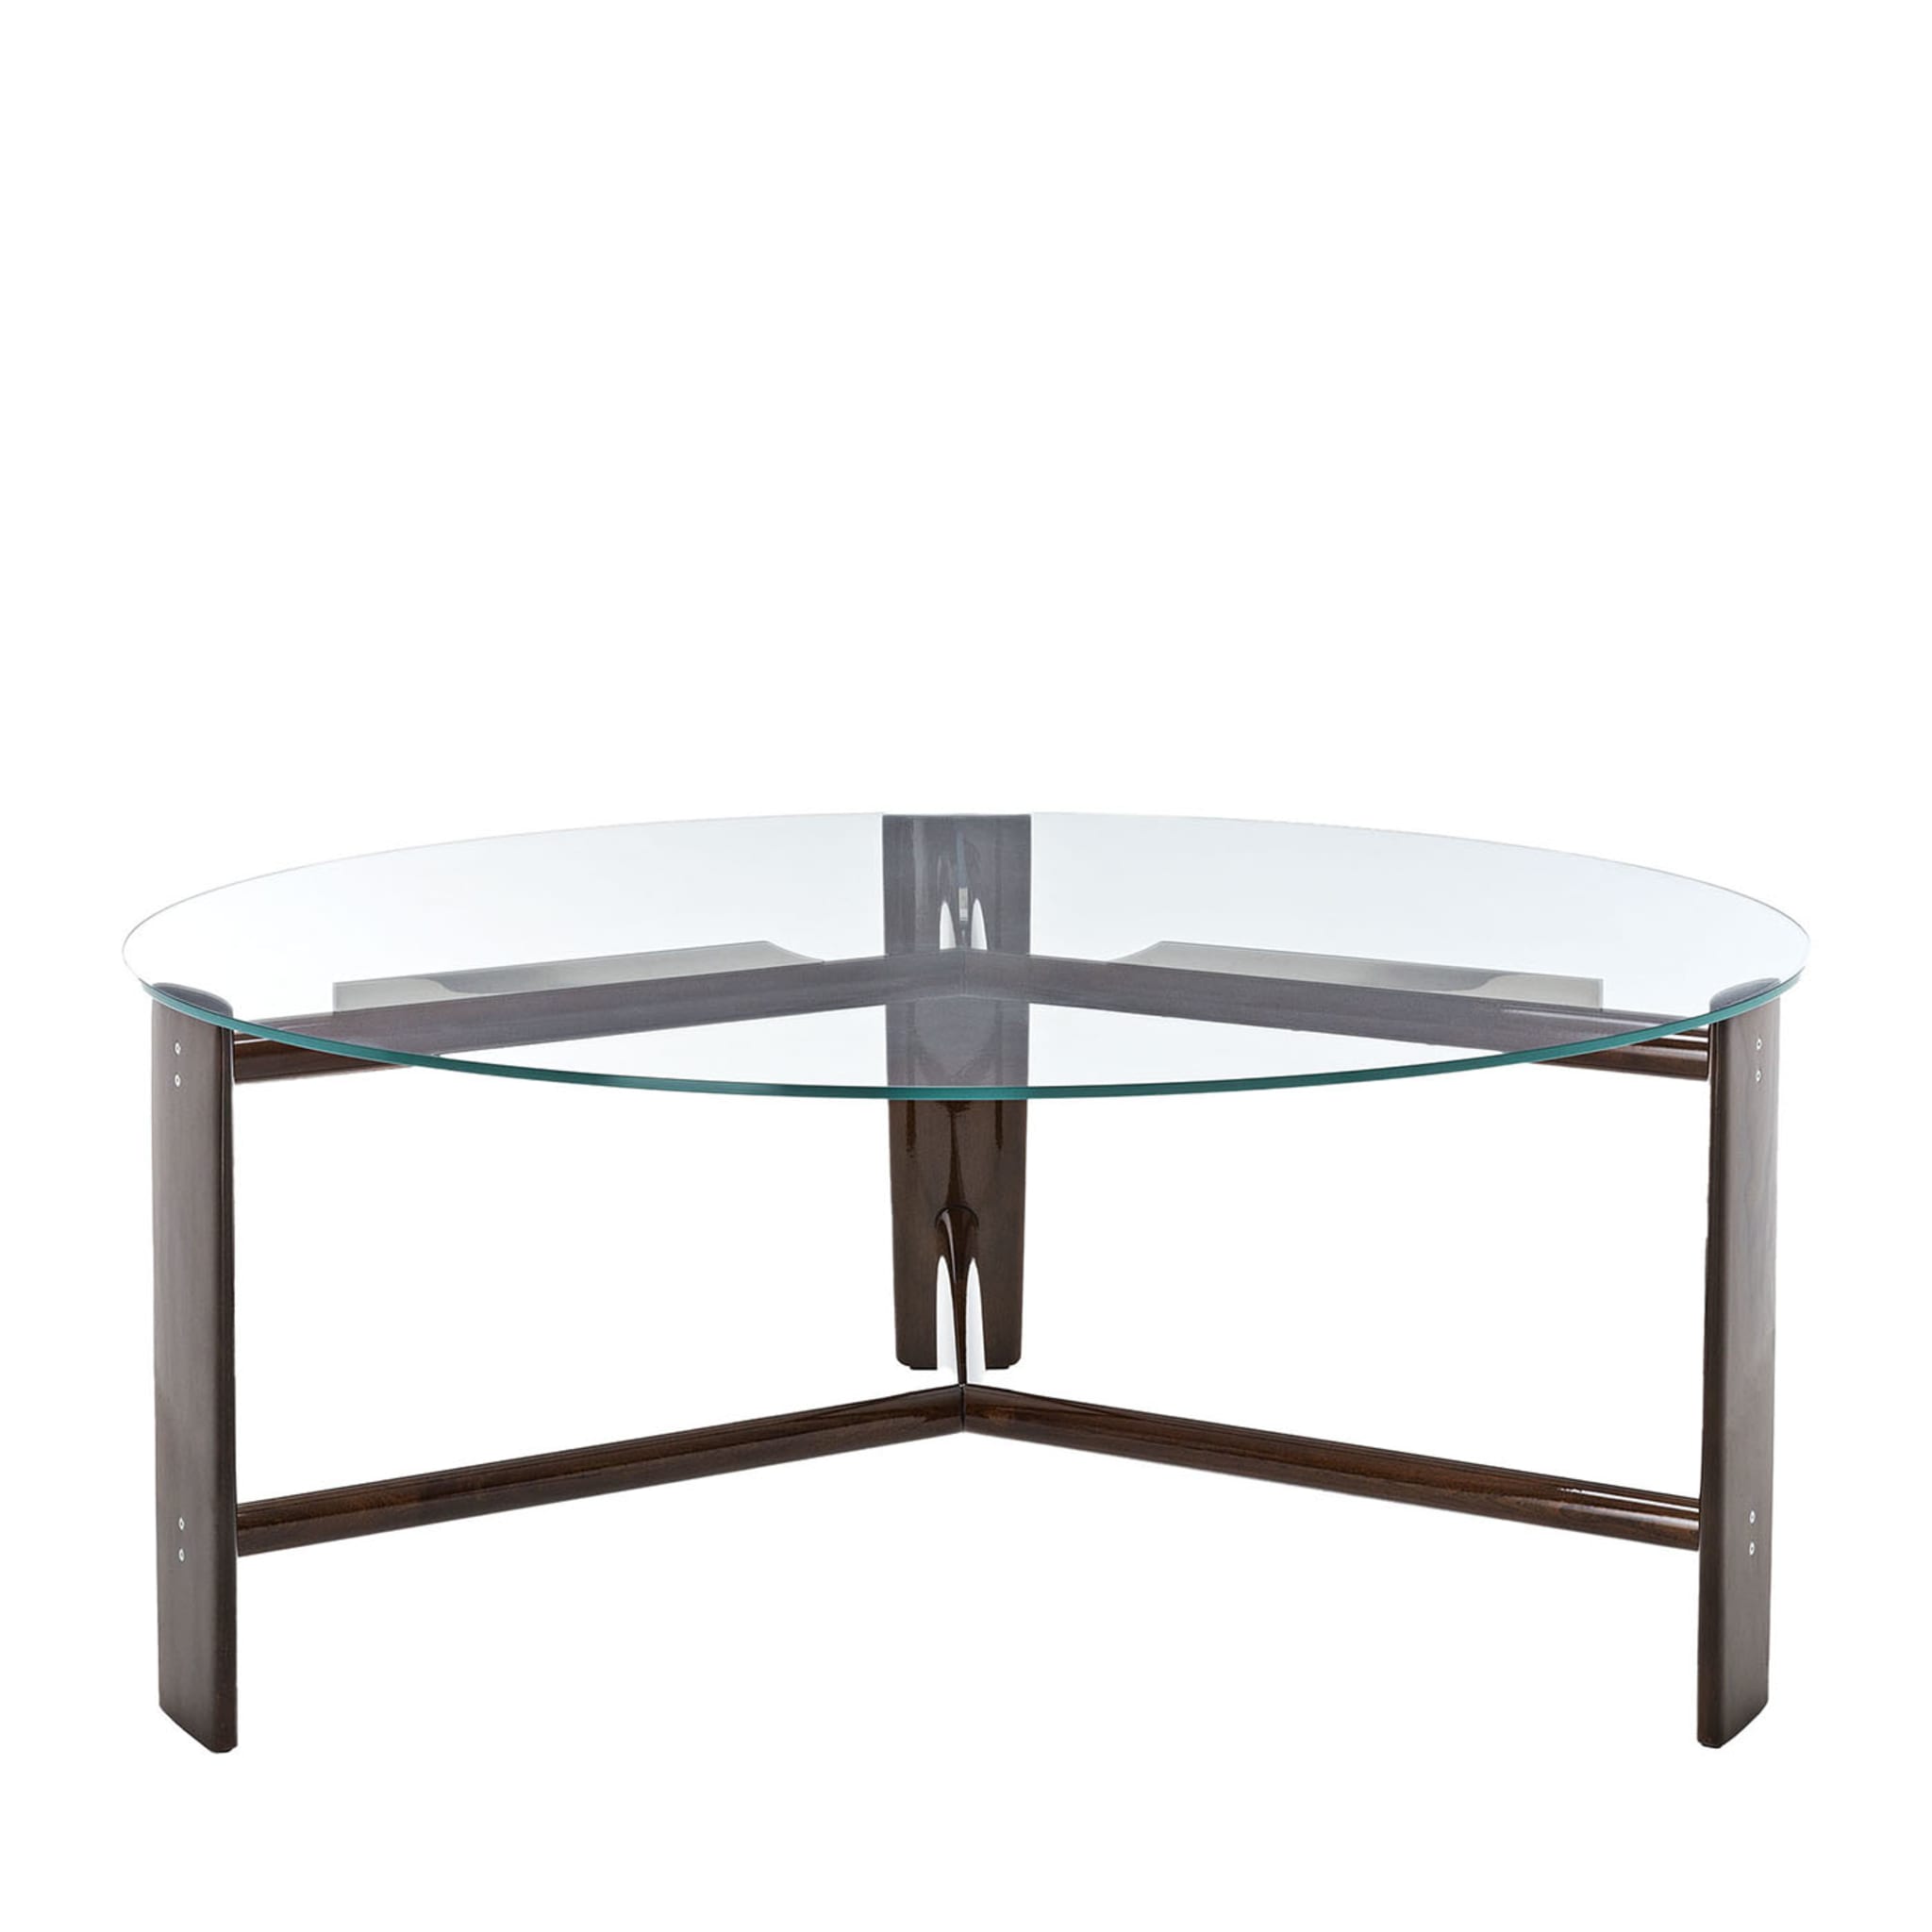 No-Glue Dining Table by Massimo Castagna - Main view